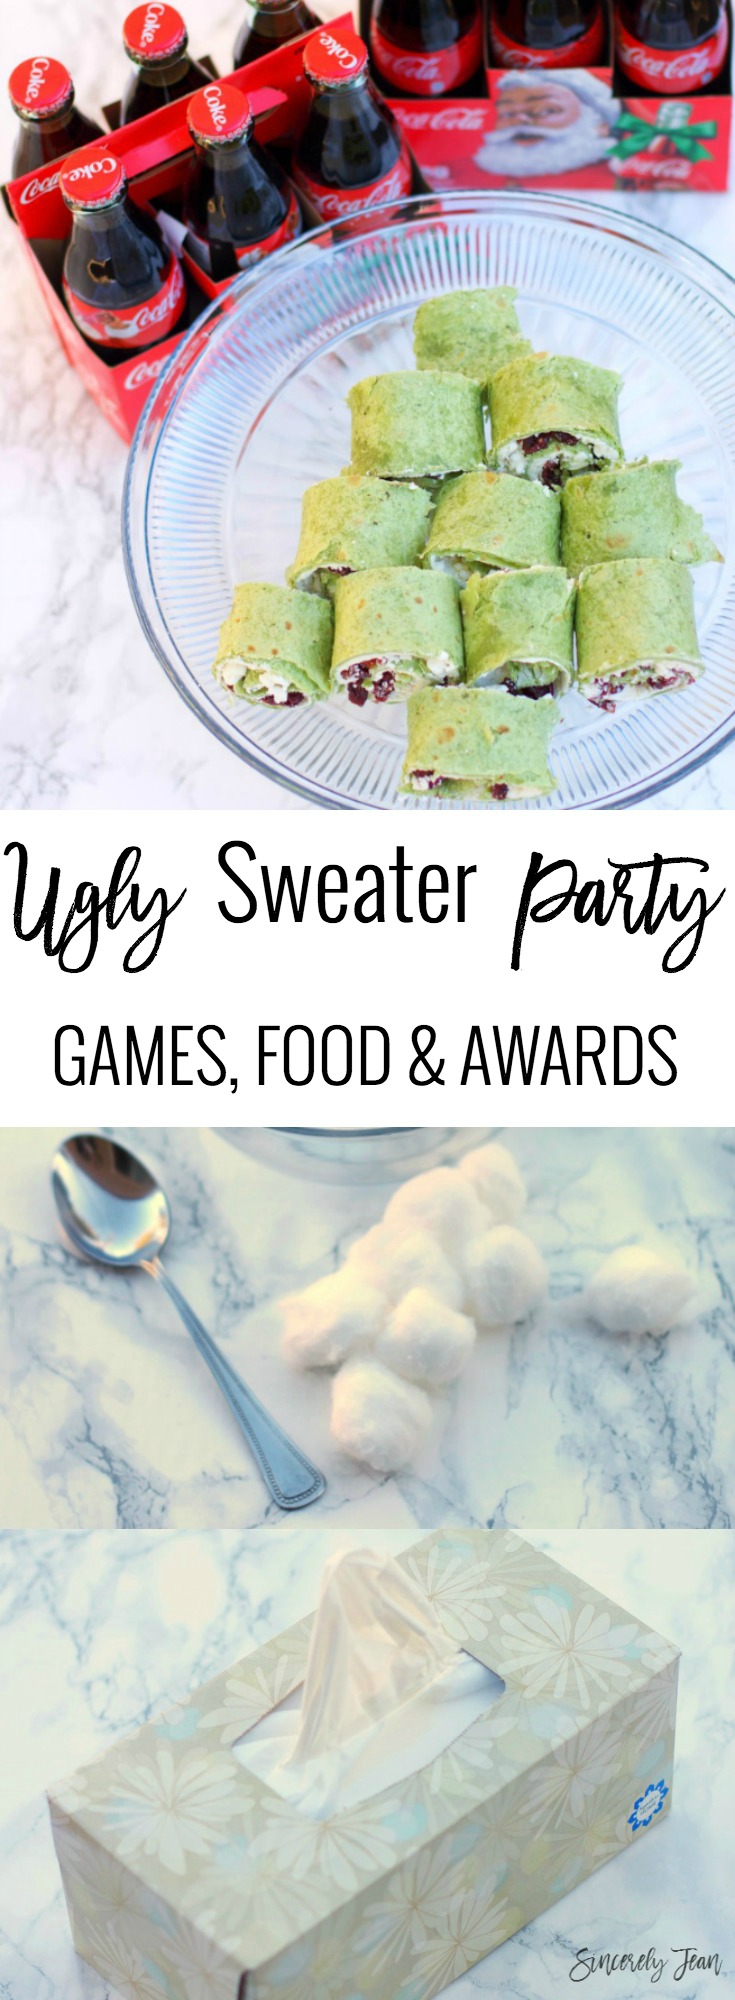 SincerelyJean.com Ugly Sweater Holiday Party How To! Appetizer Recipe, Food and Drink Ideas, Games and Awards. Try these Cream Cheese Cranberry Pinwheels